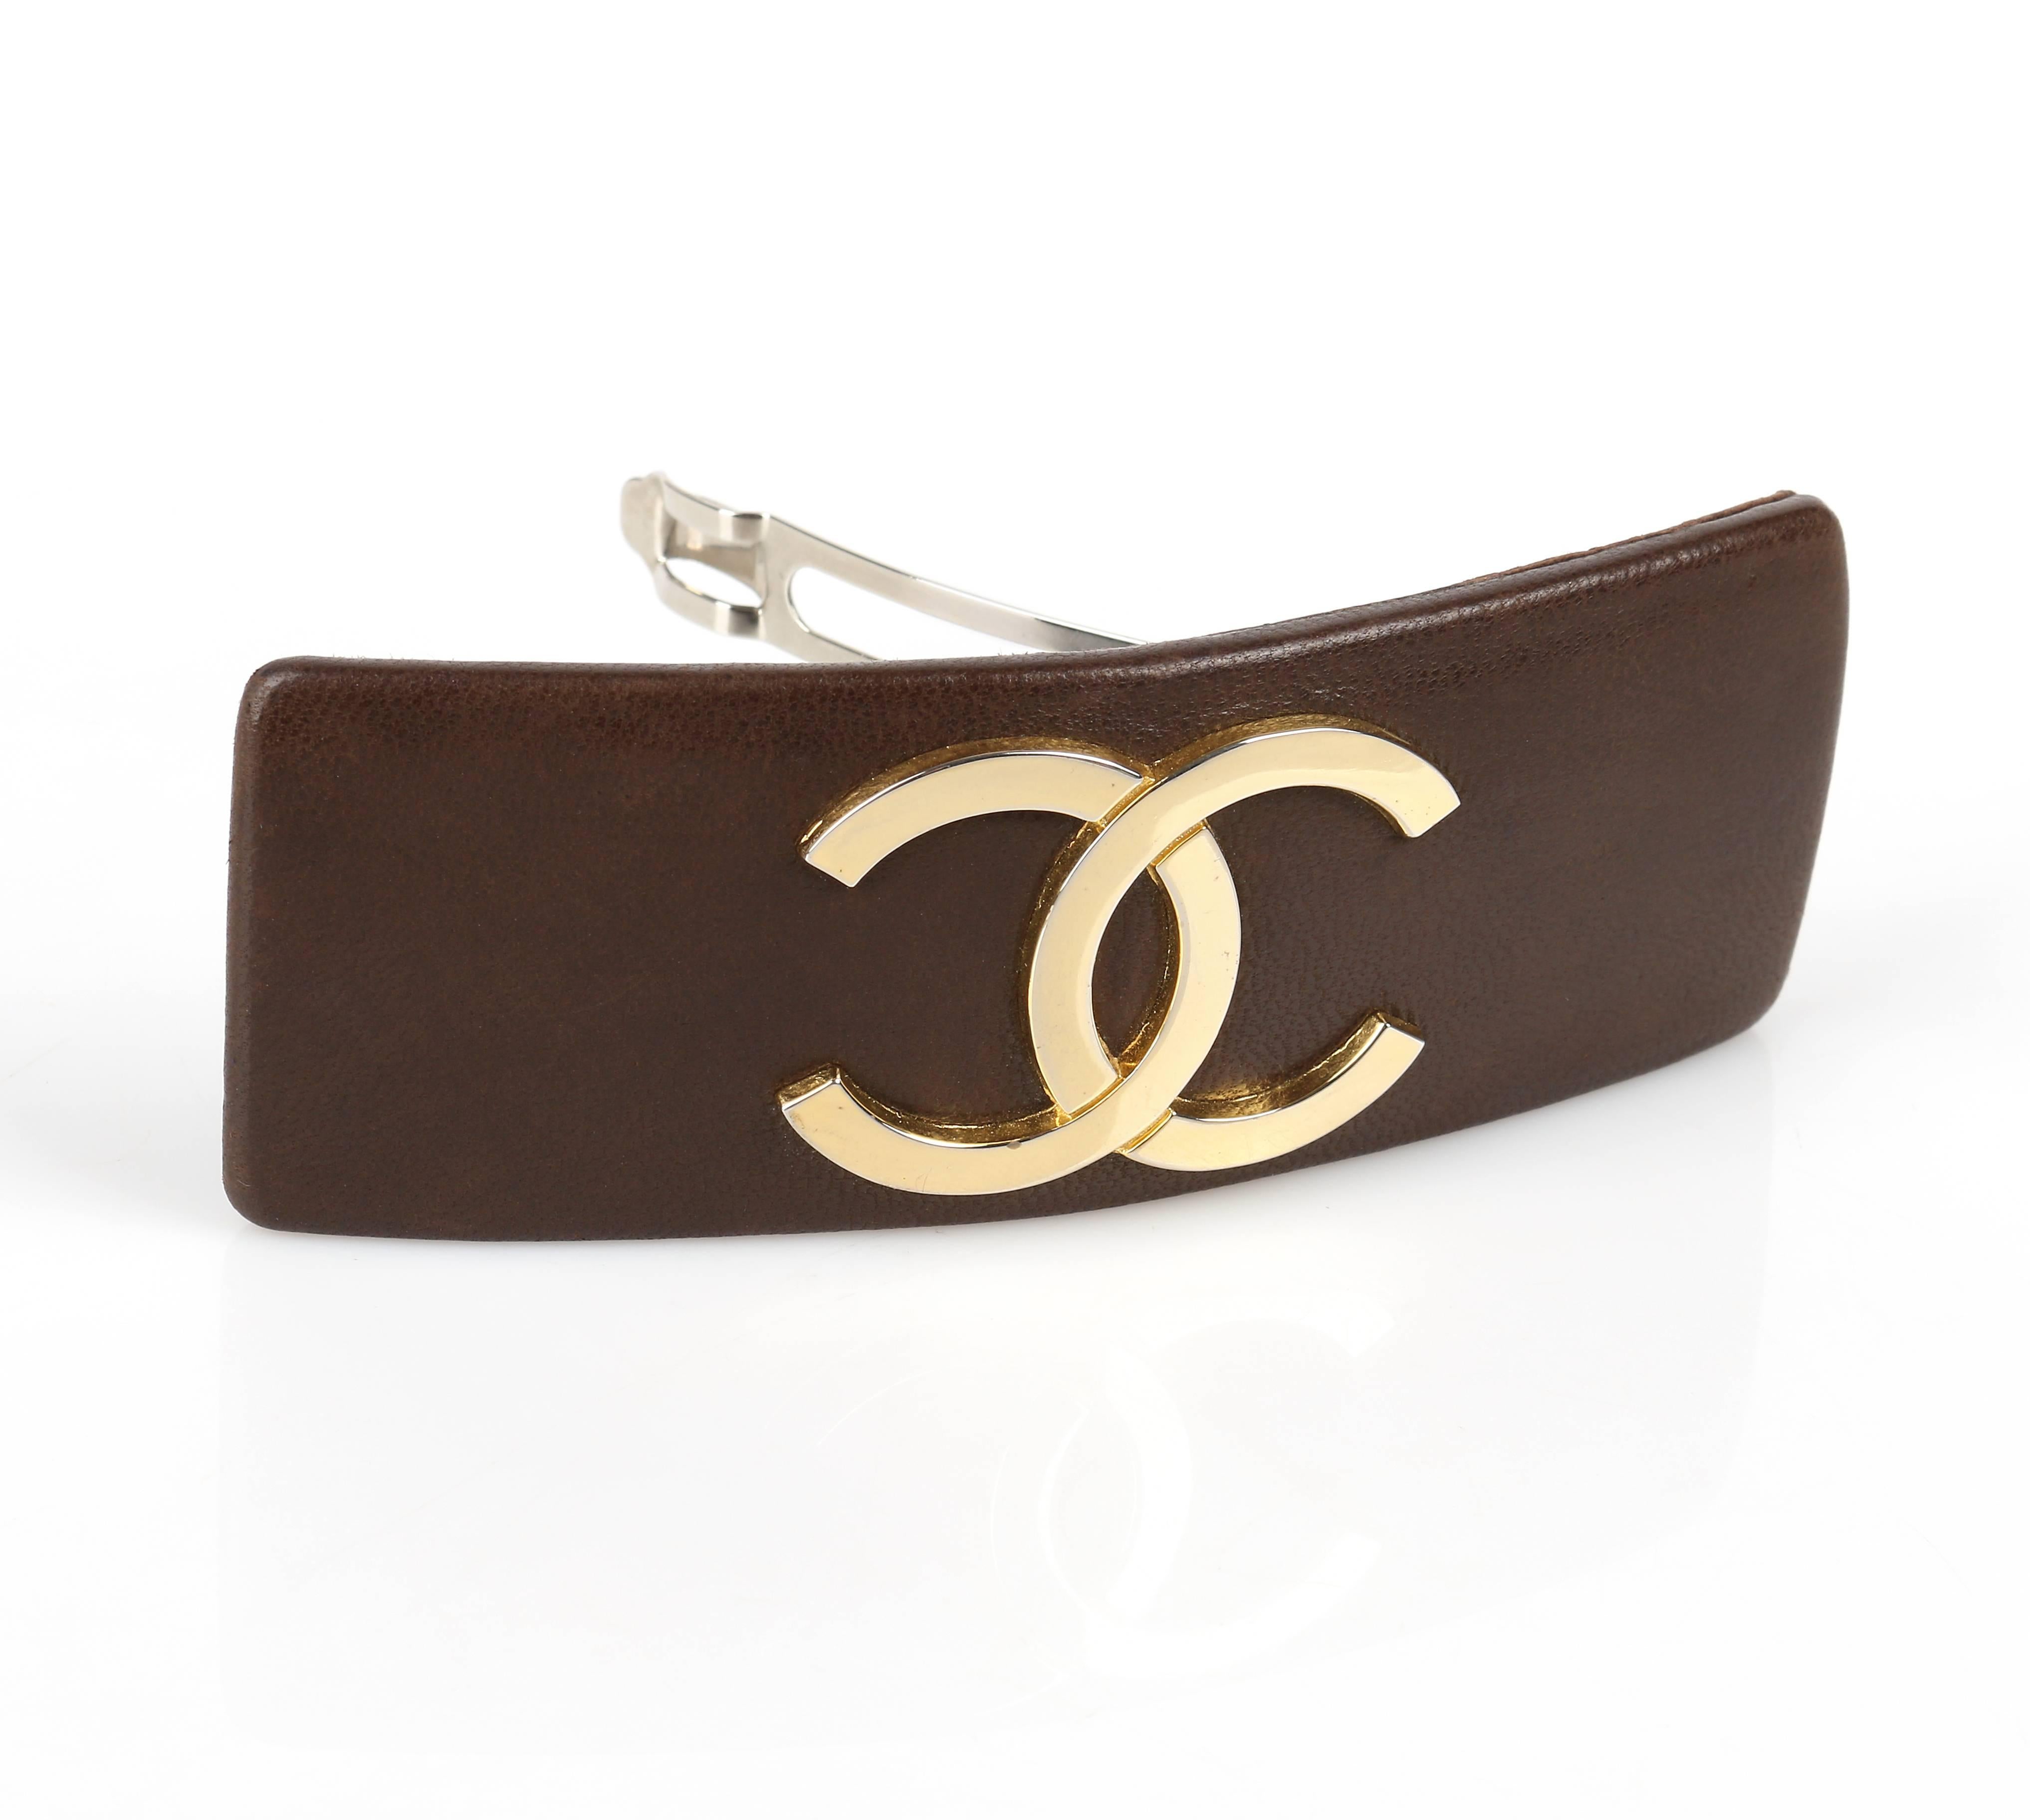 Chanel brown genuine leather covered barrette. Gold toned metal 